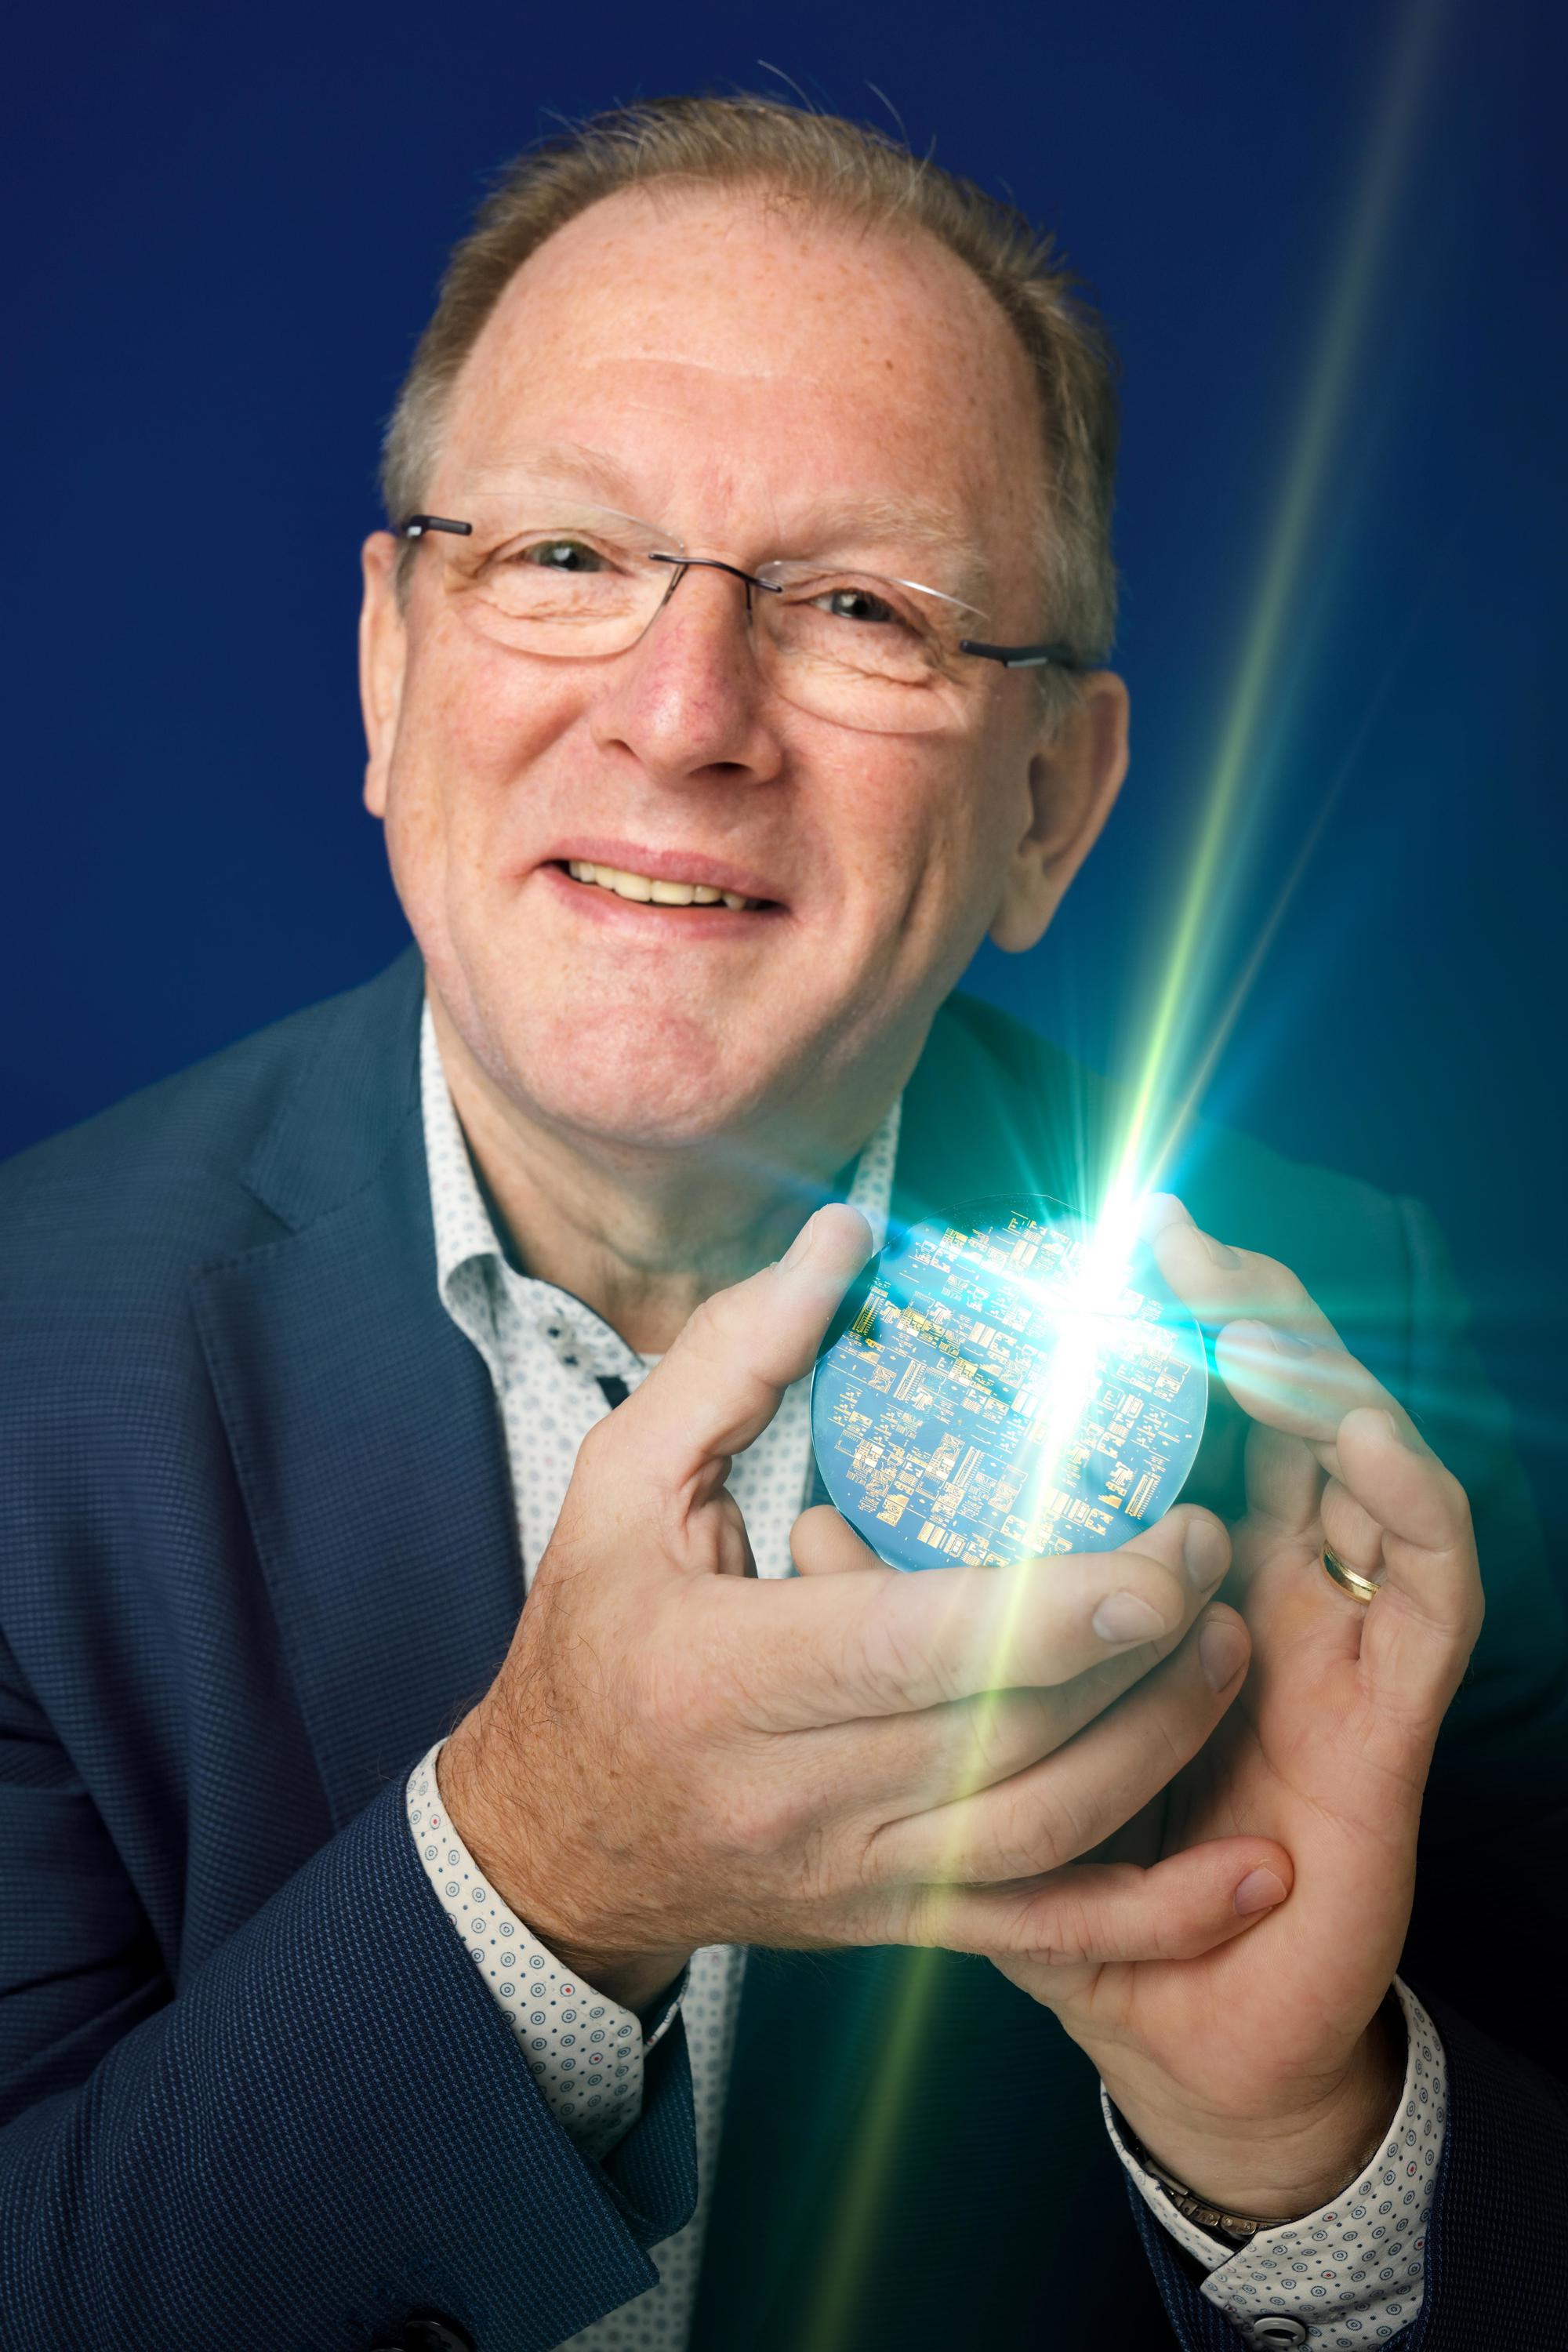 Photonics is embraced by governments | Ton Backx